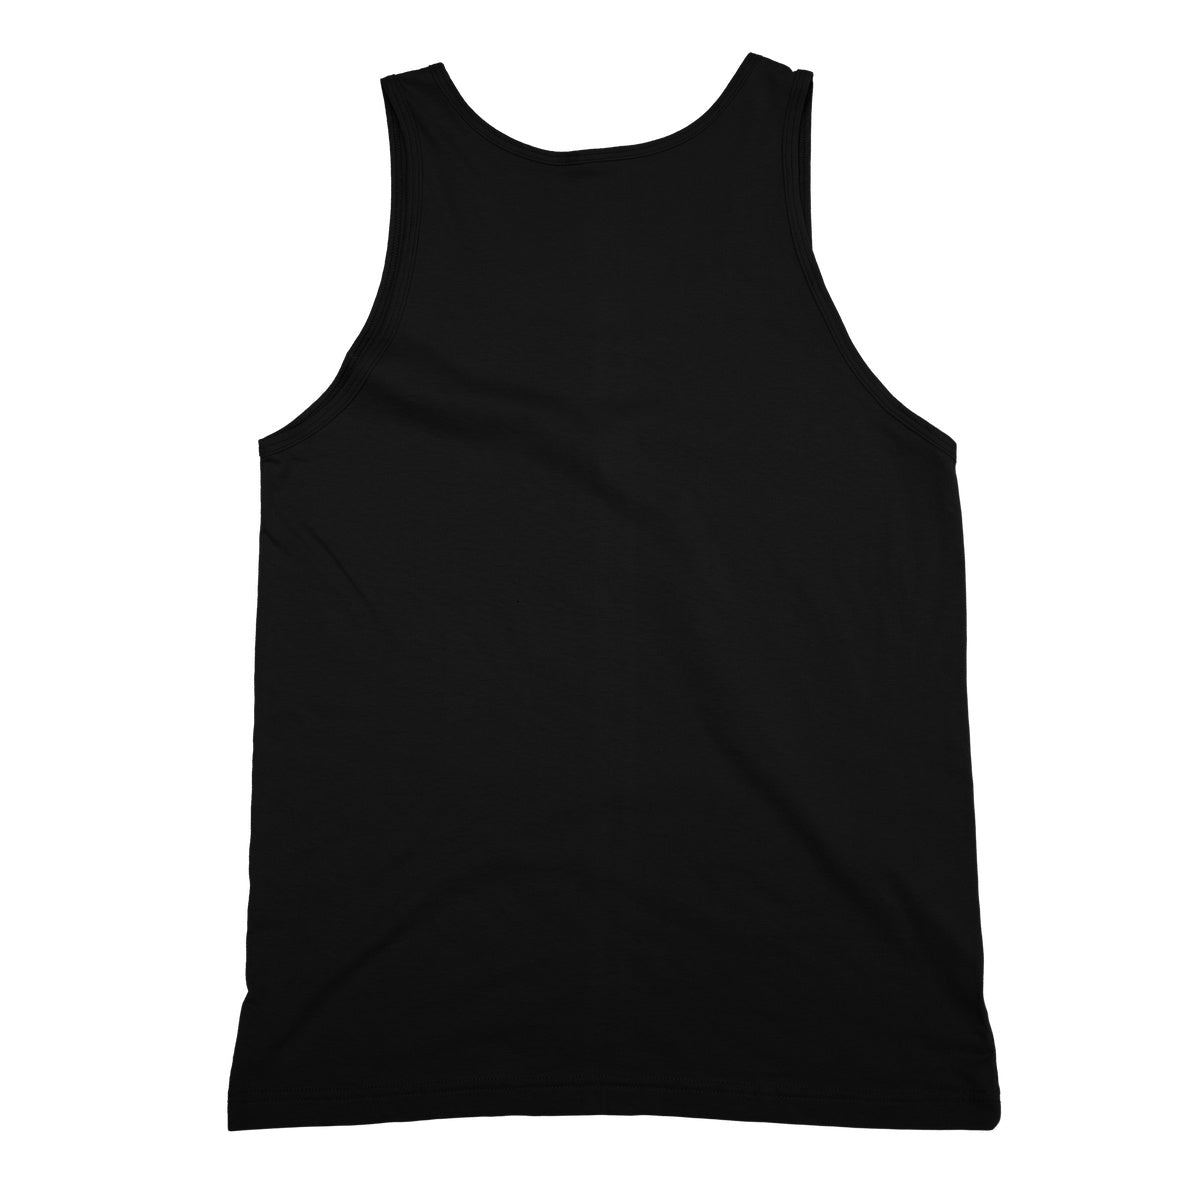 If Dad Csm't Fit It We Are All Screwed Softstyle Tank Top